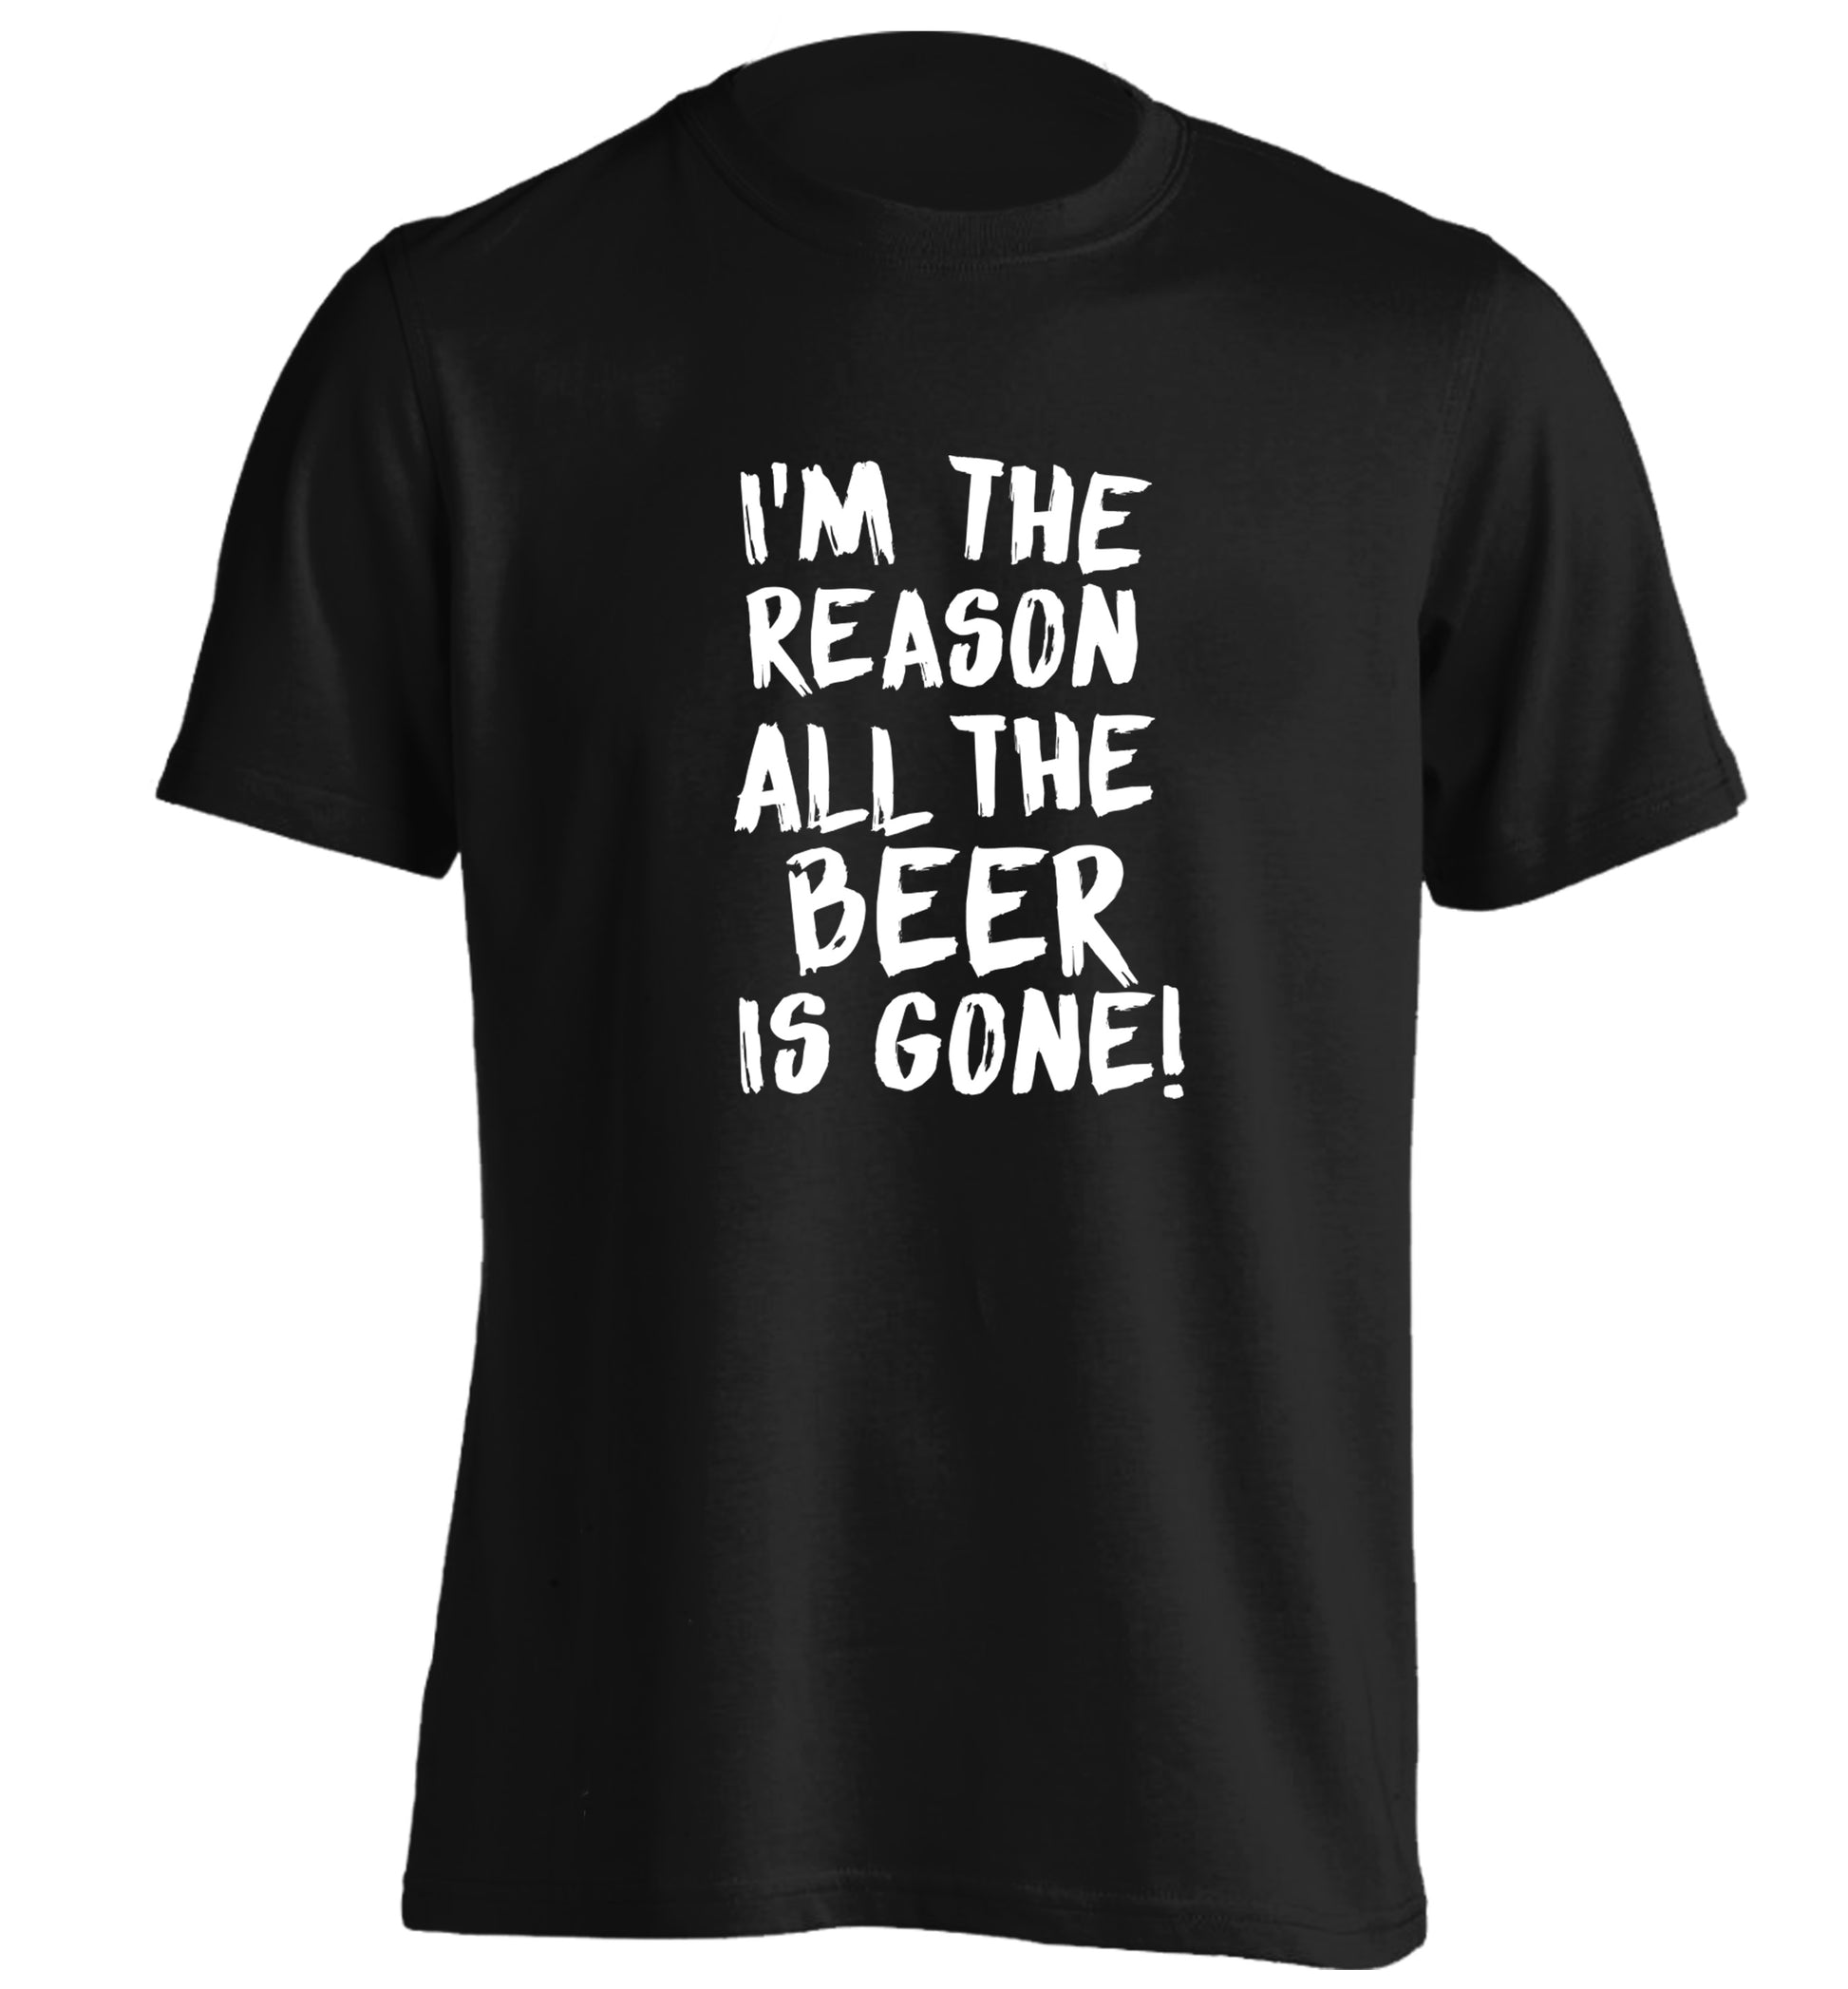 I'm the reason all the beer is gone adults unisex black Tshirt 2XL